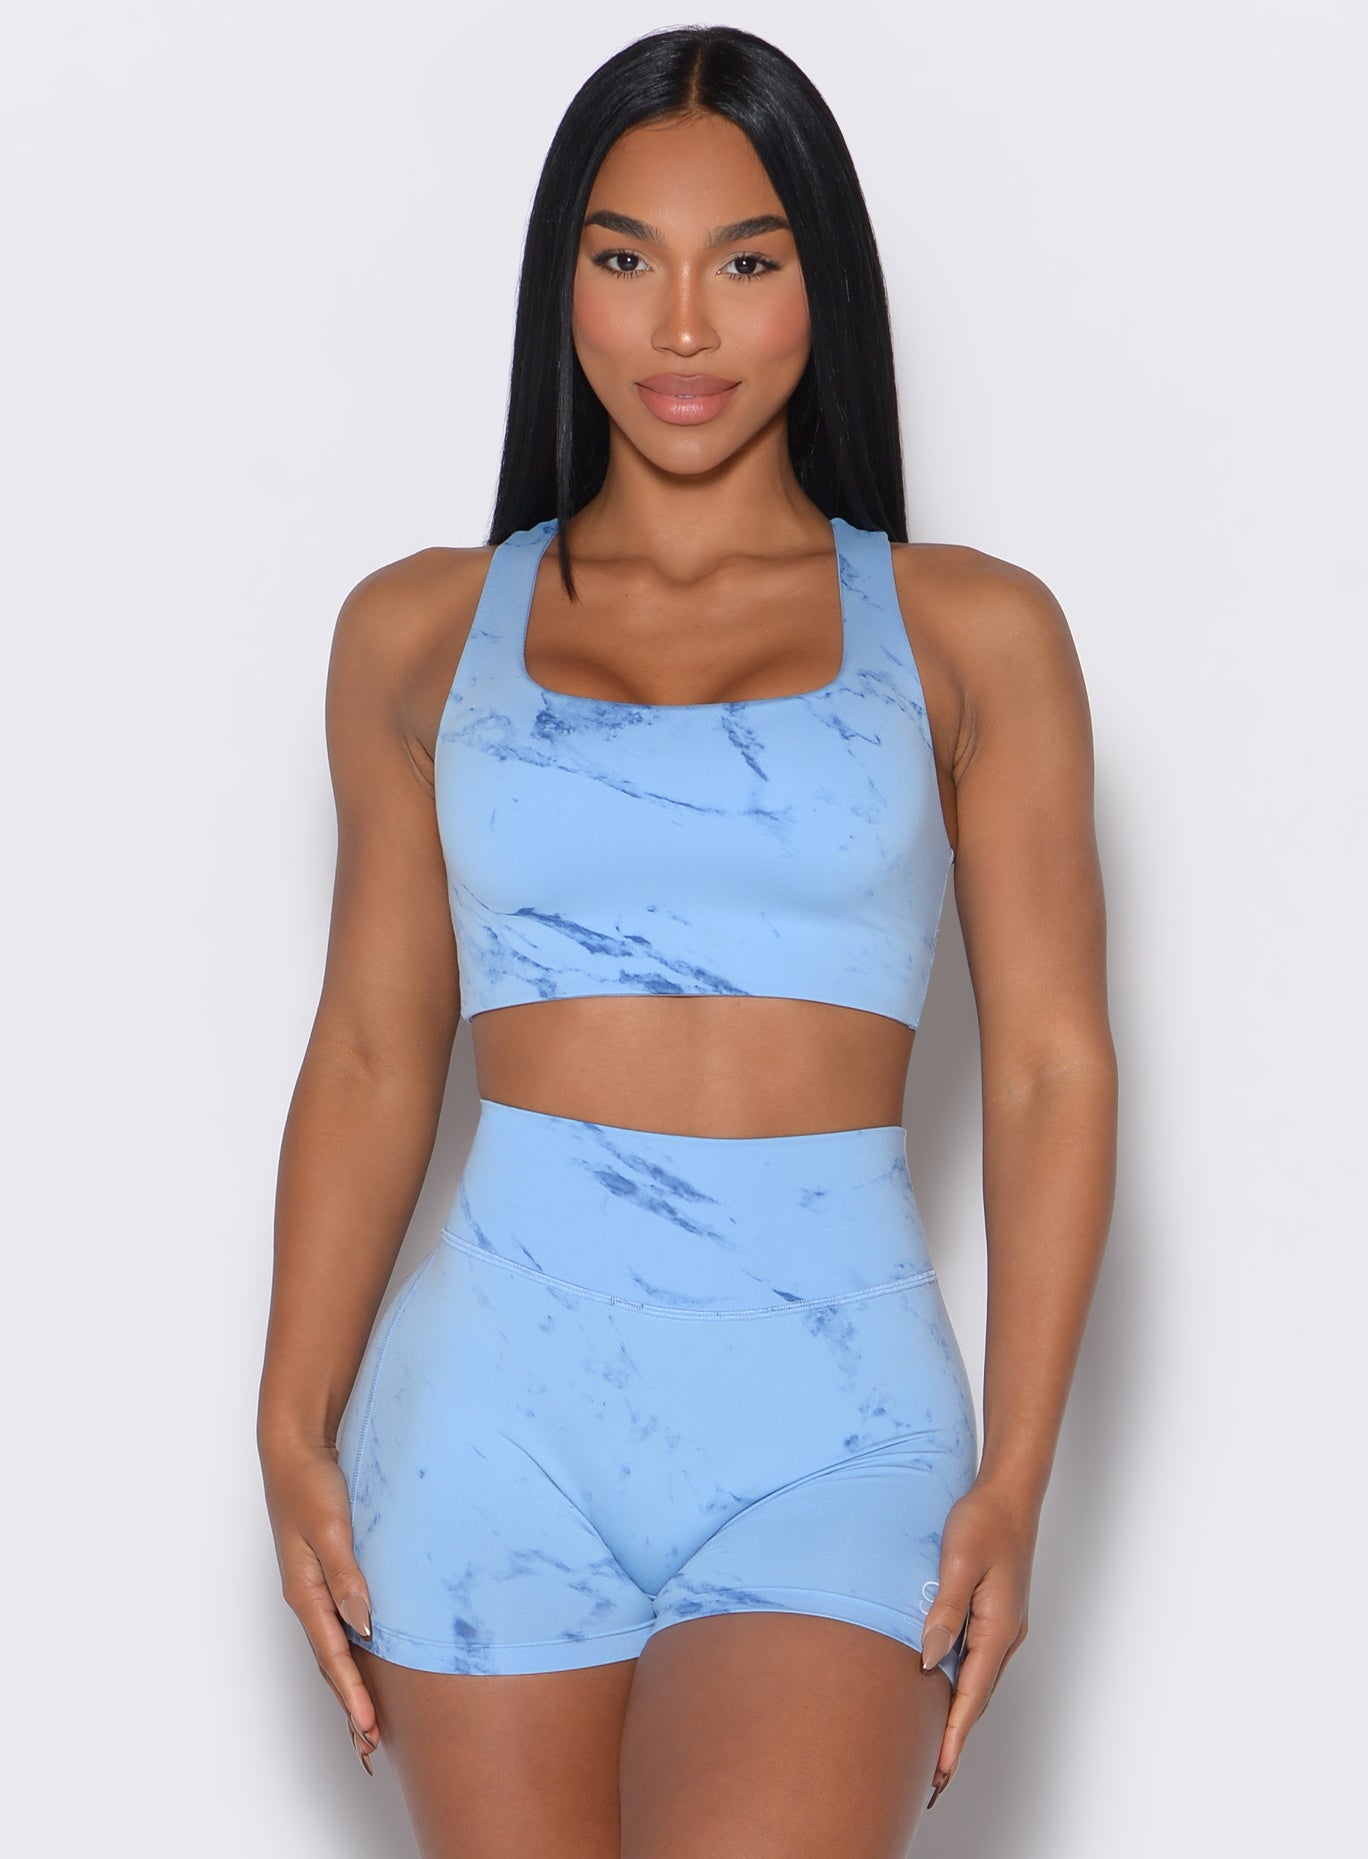 Front profile view of our model facing forward wearing the Square Neck Bra in Blue Jay color and the matching shorts